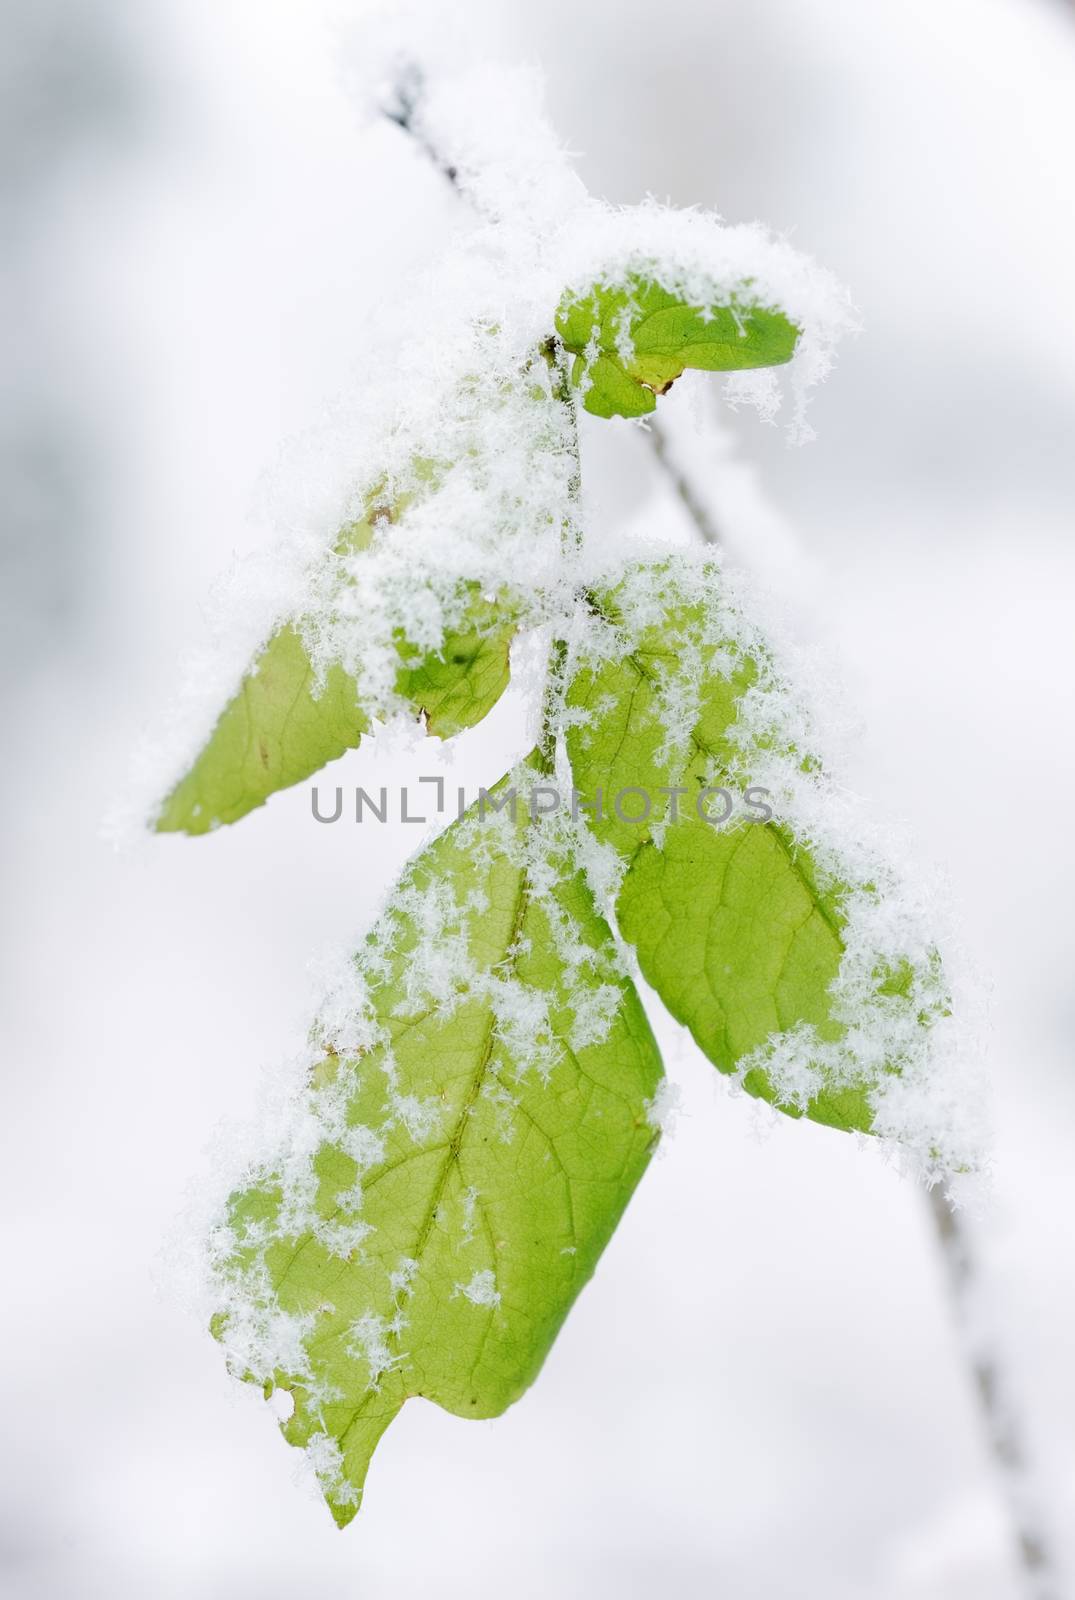 Snow covered leaves by kmwphotography